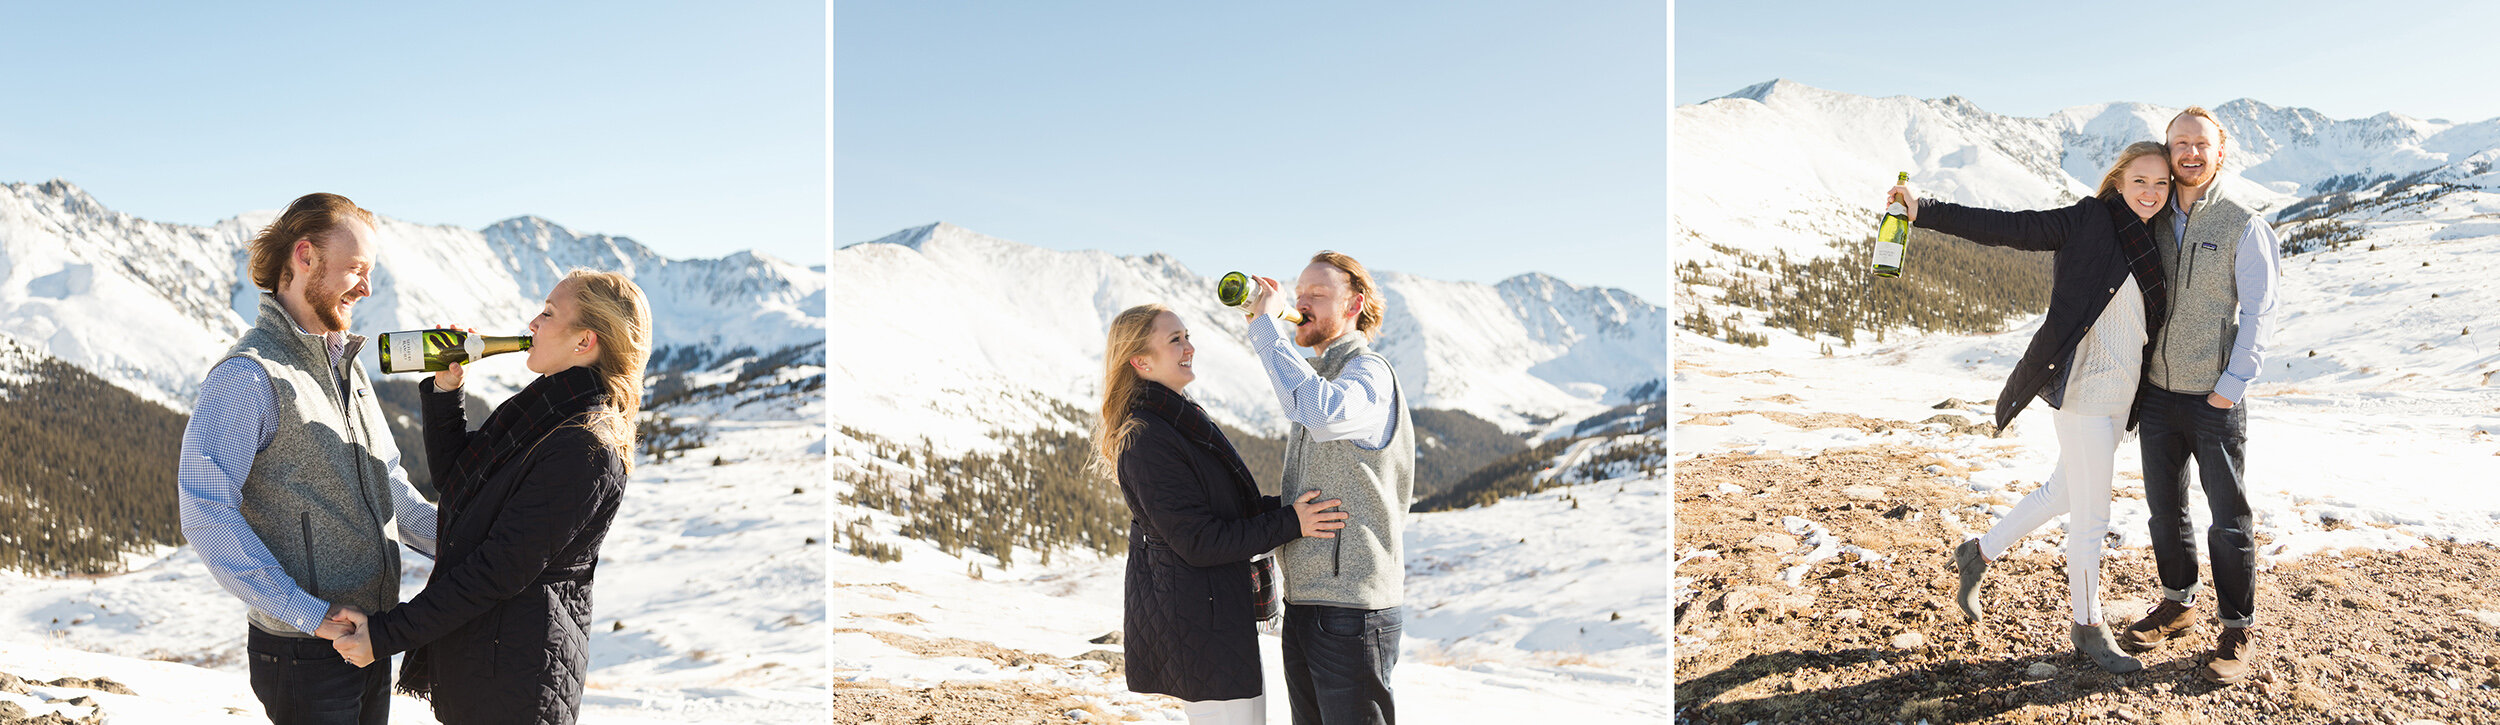 snowy-colorado-engagement-photos-in-the-forest-by-jackie-cooper-photo-17.jpg